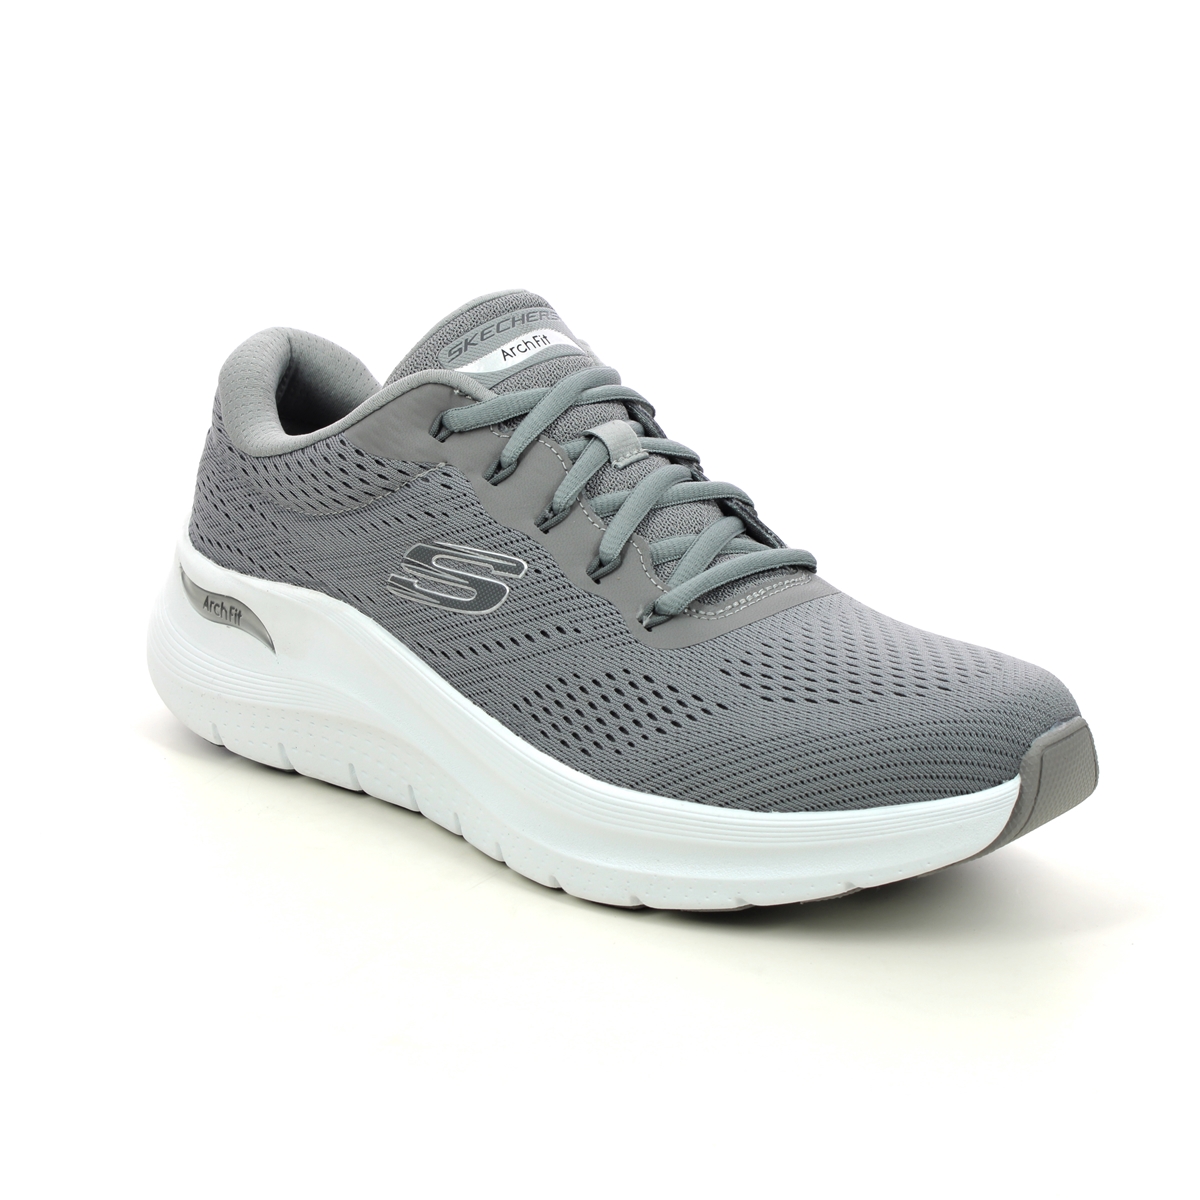 Skechers Arch Fit 2 Lace GRY Grey Mens trainers 232700 in a Plain Textile in Size 8